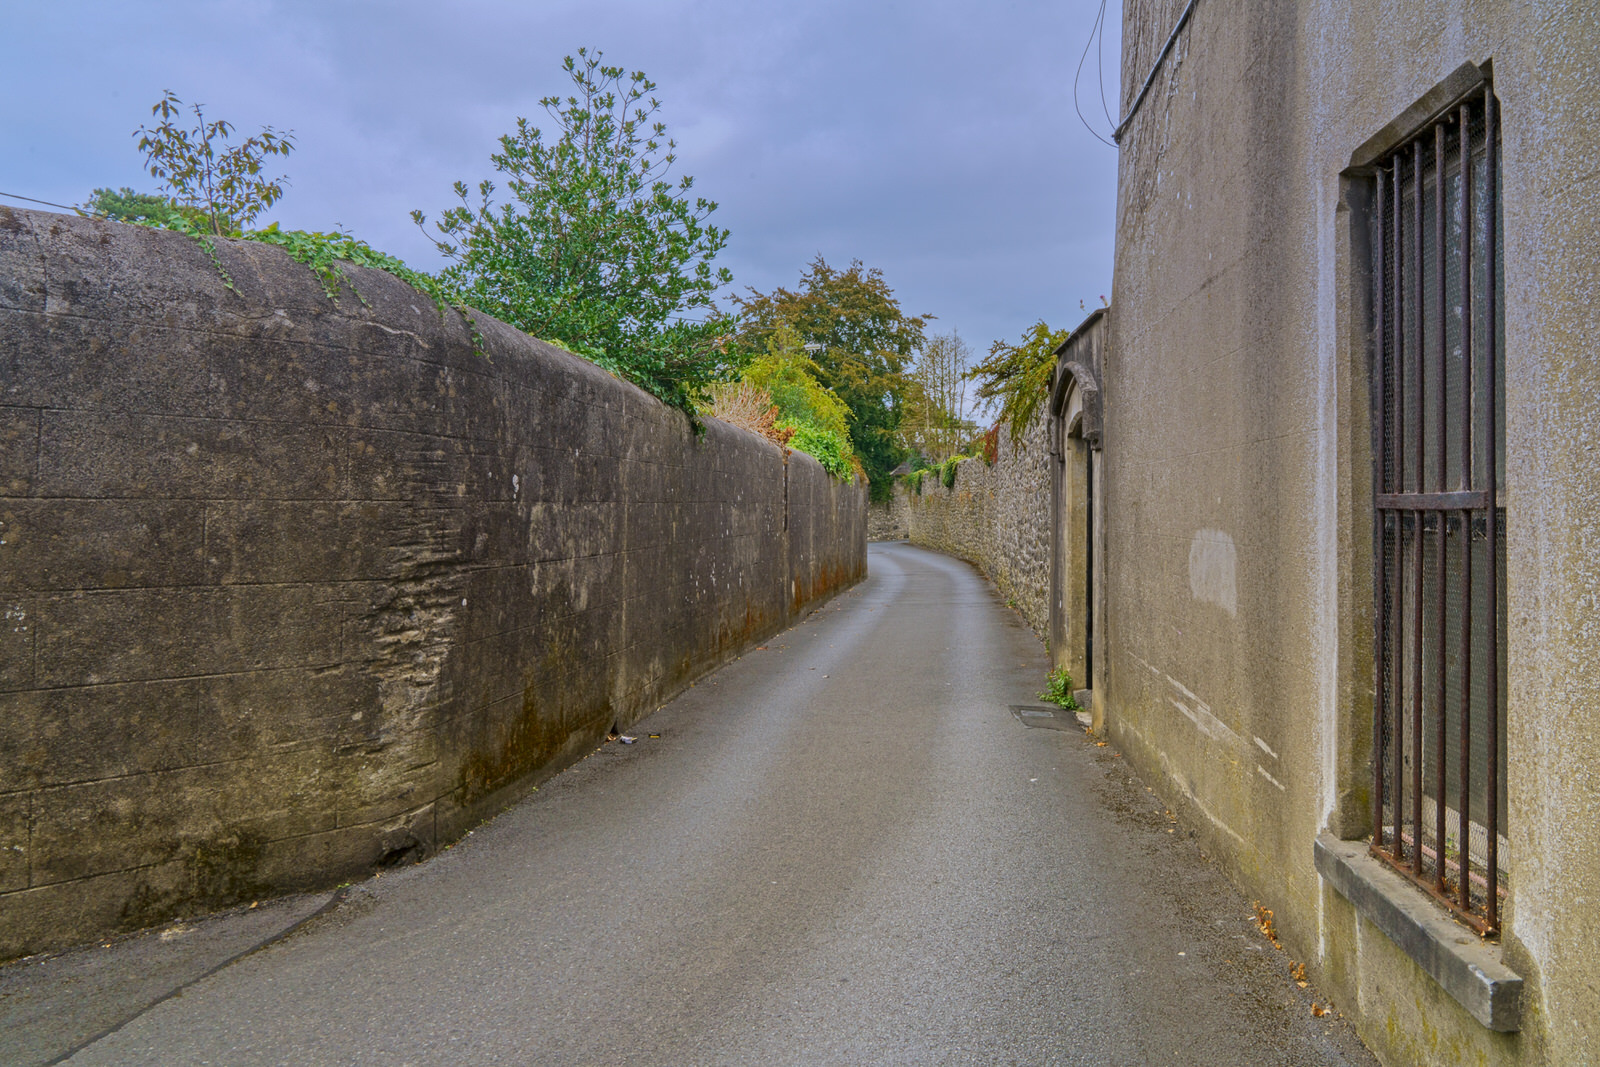 IN 2018 I EXPLORED A NARROW LANE NETWORK IN KILKENNY [DEAN STREET TO BUTT'S GREEN]-234275-1